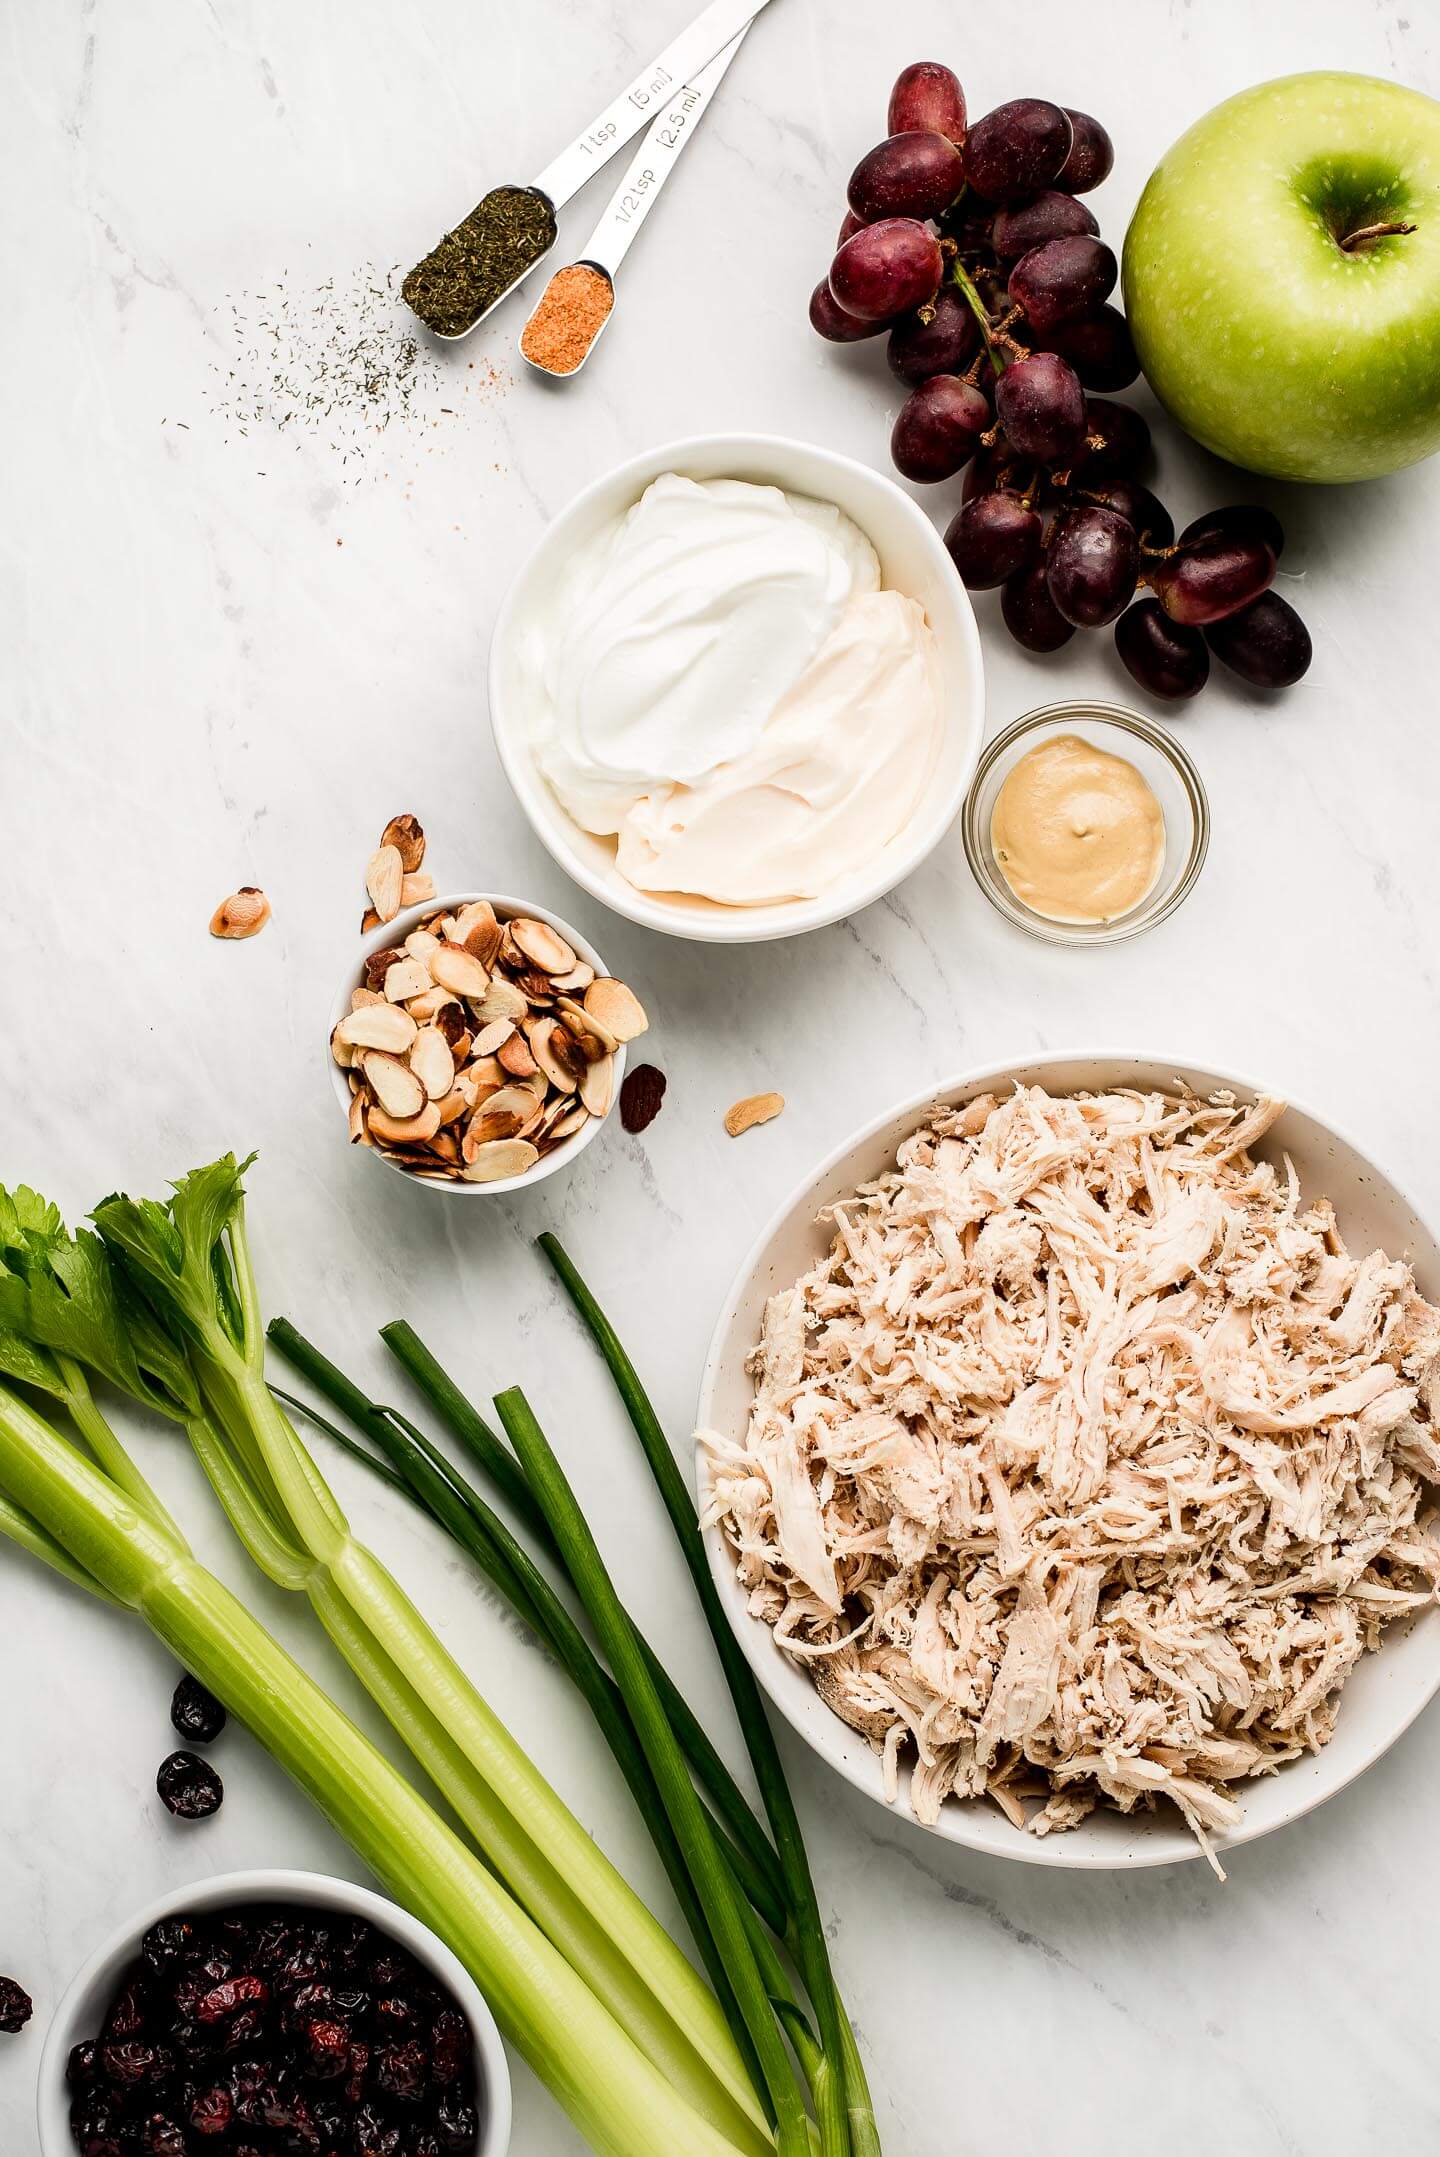 Ingredients on a marble surface- apple, grapes, seasoning, mayonnaise, nuts, mustard, shredded chicken, celery, onions, and Craisins.